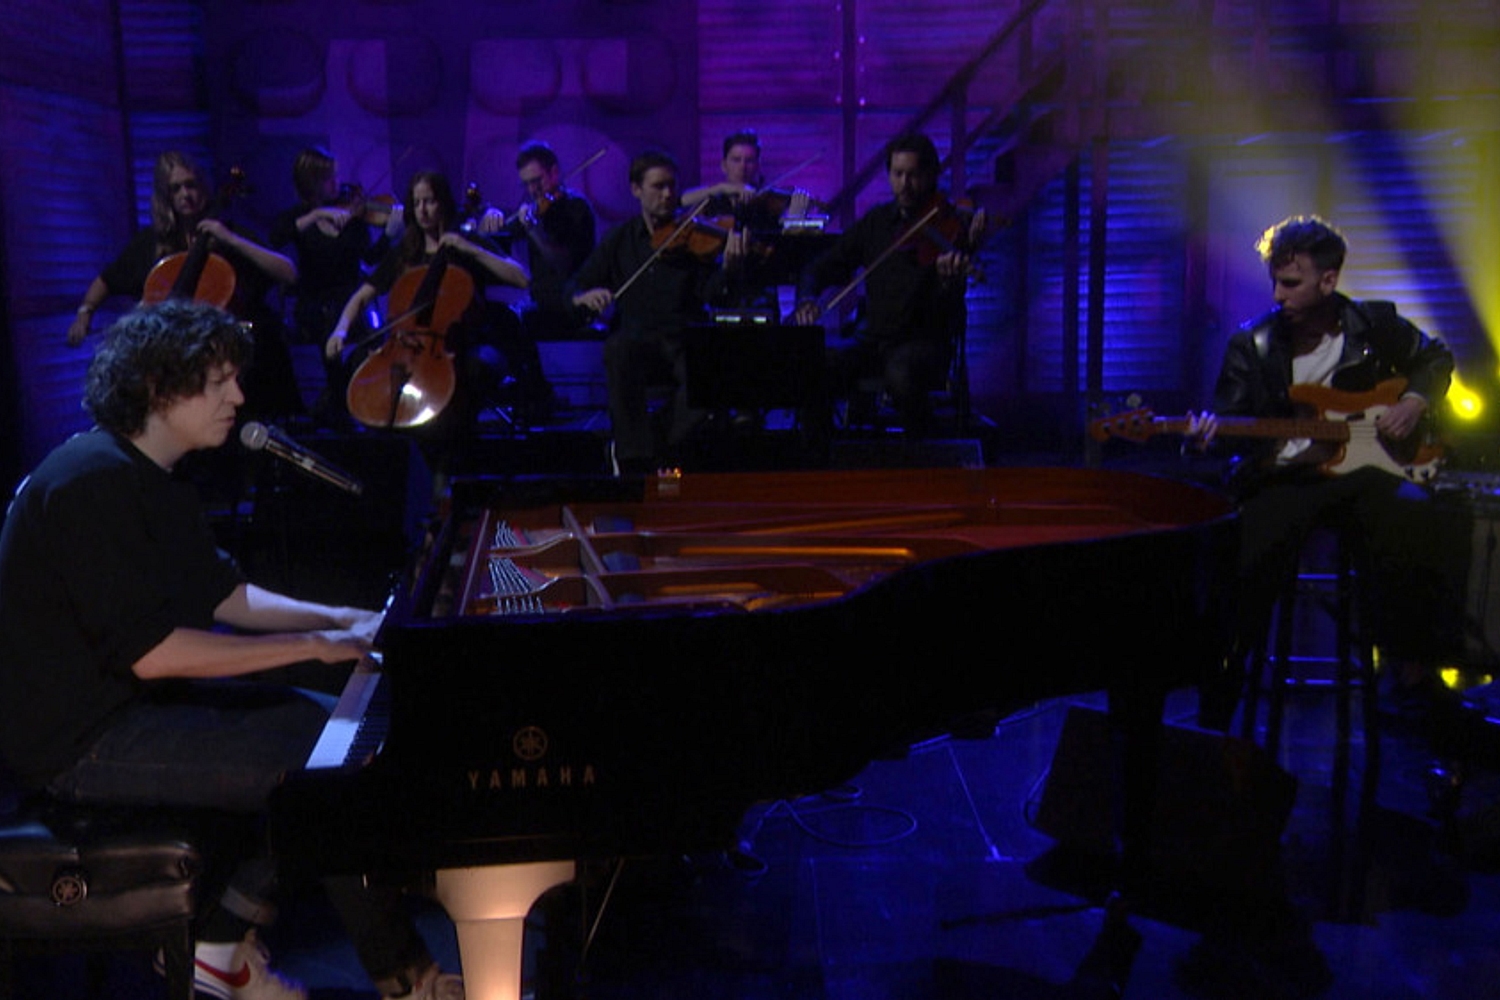 Watch Tobias Jesso Jr. play ‘Without You’ on Conan with Danielle Haim